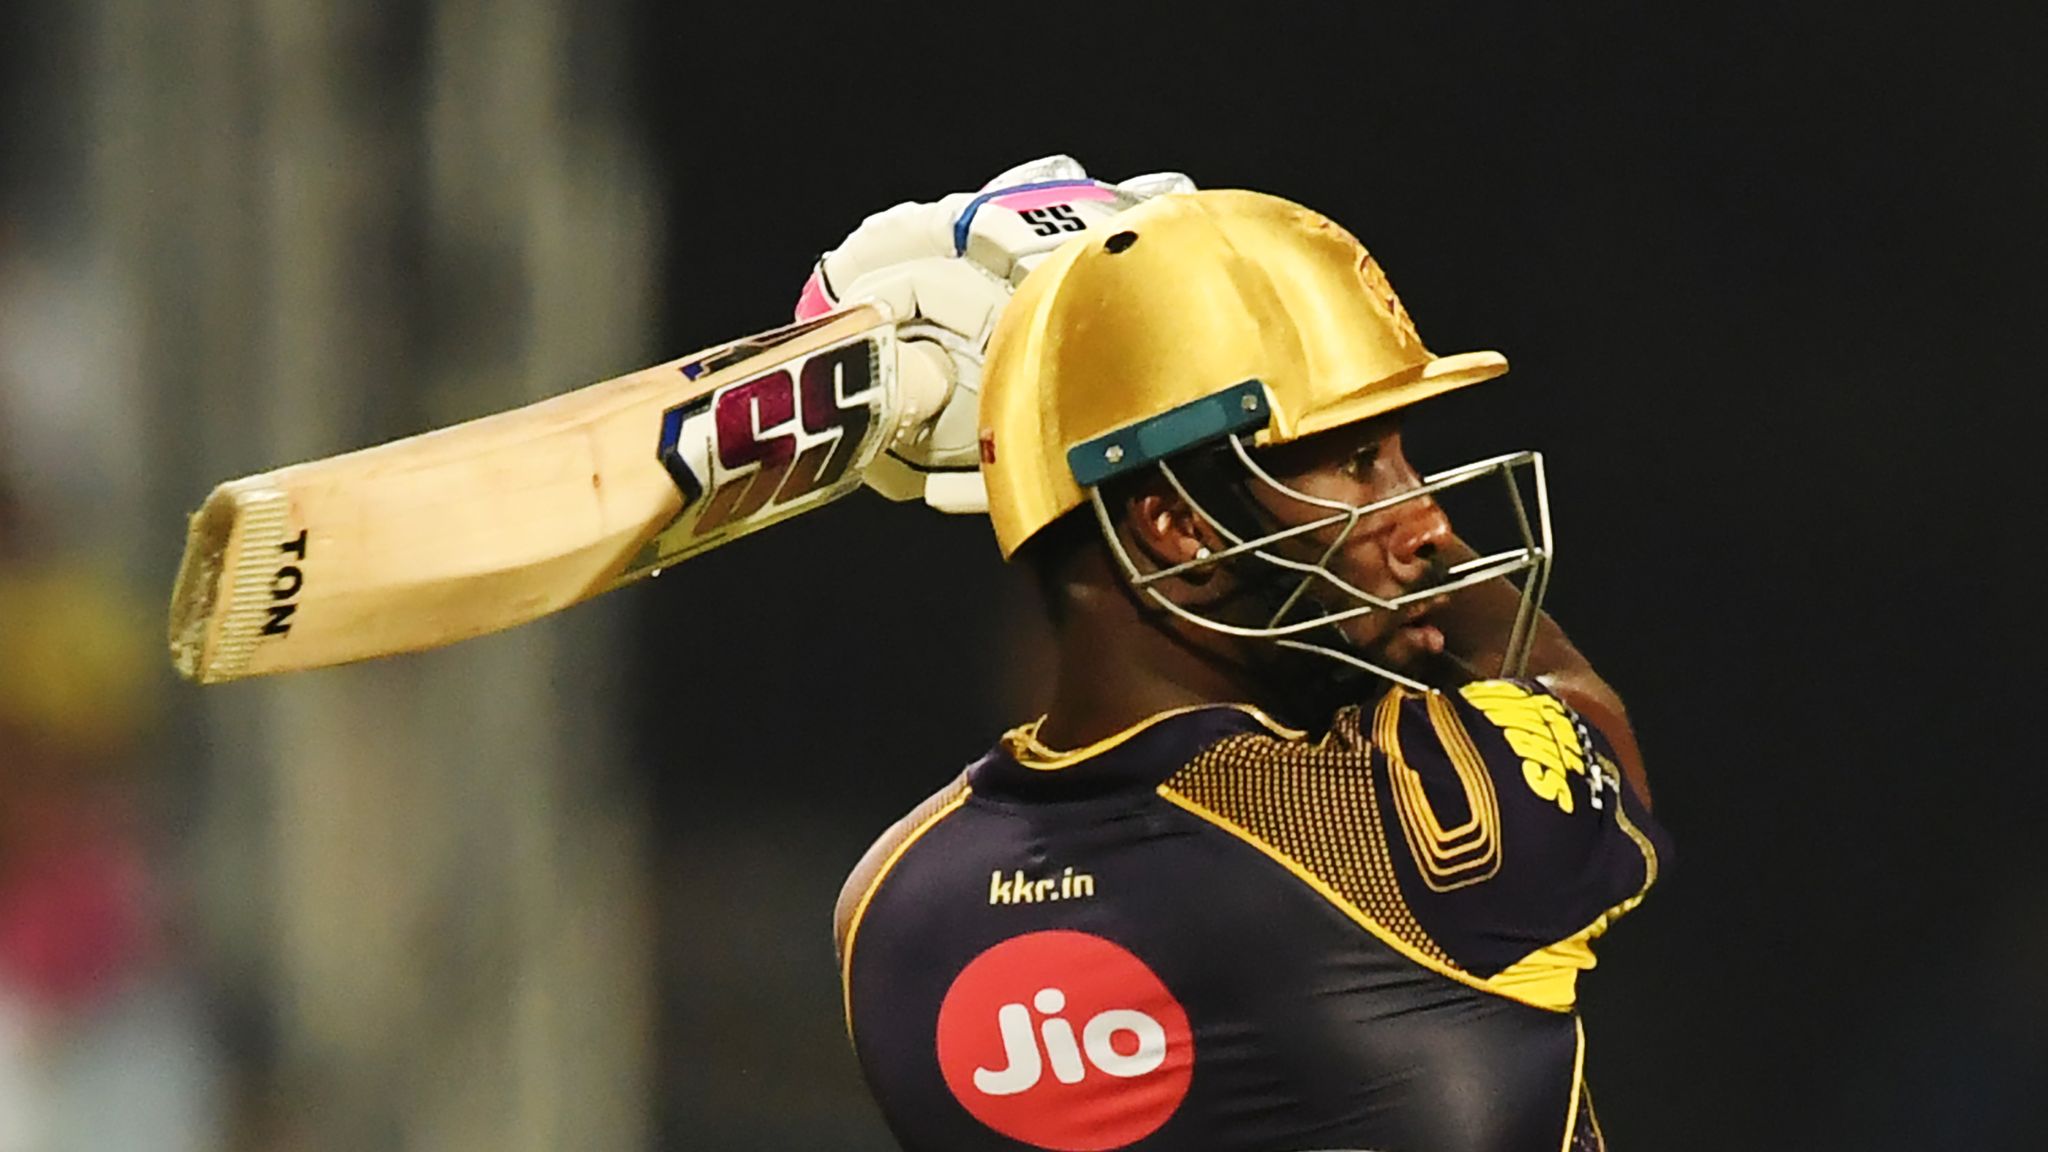 Jason Roy out cheaply as Andre Russell hammers Kolkata to IPL victory over Delhi